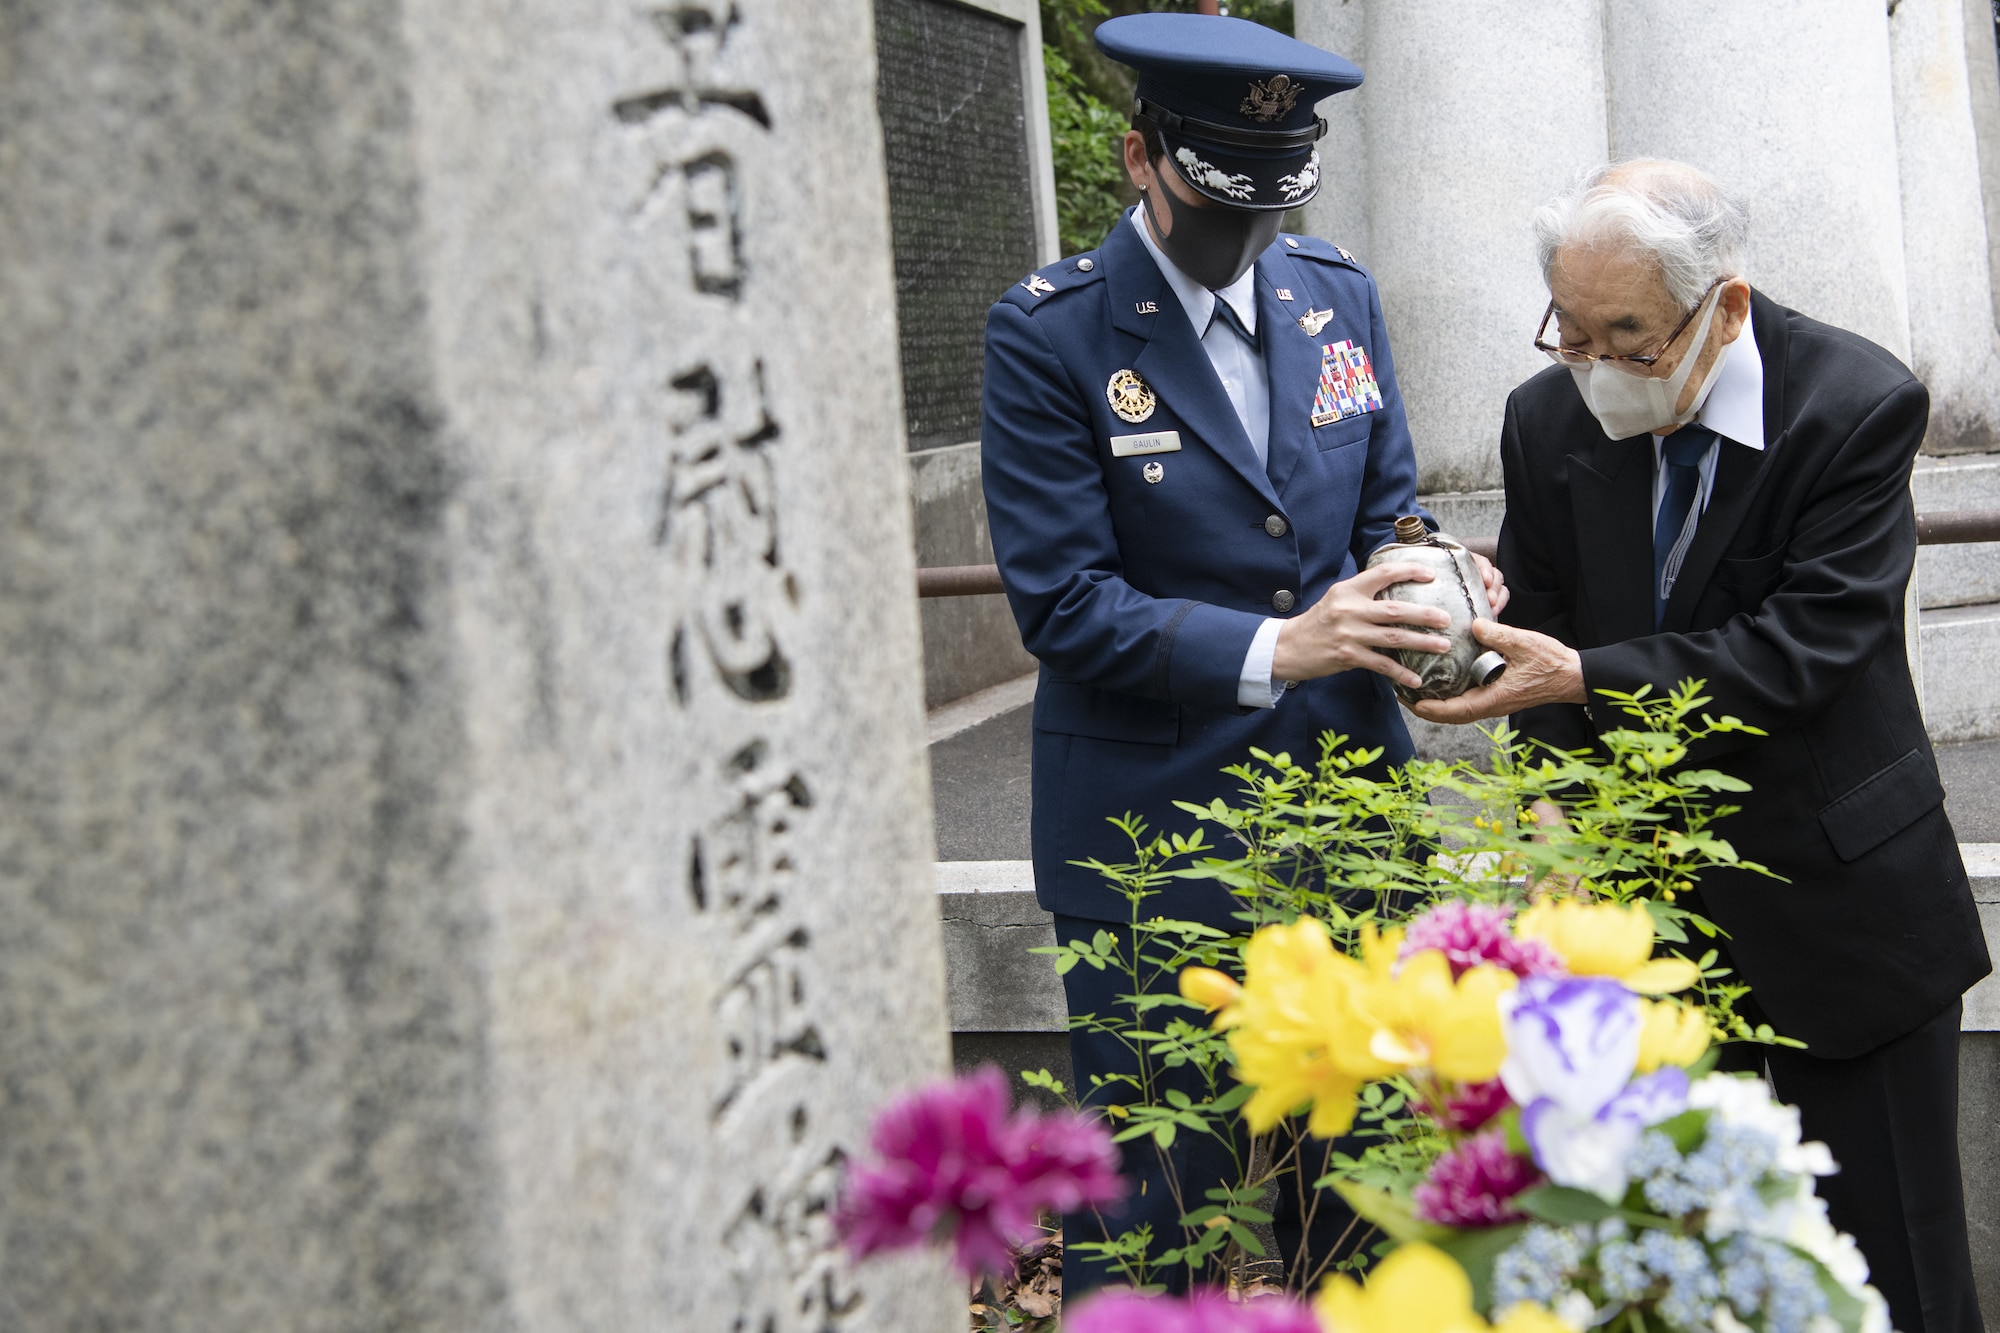 U.S. Air Force Col. Julie Gaulin, 374th Airlift Wing vice commander, left, and Dr. Hiroya Sugano, right, ceremony host, prepare to pour bourbon over a B-29 Monument as a tradition to honor the fallen during a U.S.-Japan Joint Memorial Service June 11, 2022, at Mt. Shizuhata in Shizuoka city, Japan. The memorial service provided participants the opportunity to honor those who lost their lives during a World War II air raid on June 20, 1945. During the raid, two U.S. Army Air Forces B-29 Superfortresses collided mid-air over Shizuoka City, resulting in the death of 23 Airmen on board the aircraft. Representatives of the U.S. Air Force’s Yokota Air Base, Japan Self Defense Force, and Shizuoka City rendered their respects to the Airmen and Japanese civilians who lost their lives as a result of the tragedy, and reflected on the strong alliance the U.S. and Japan have forged since the end of World War II. (U.S. Air Force photo by Tech. Sgt. Christopher Hubenthal)